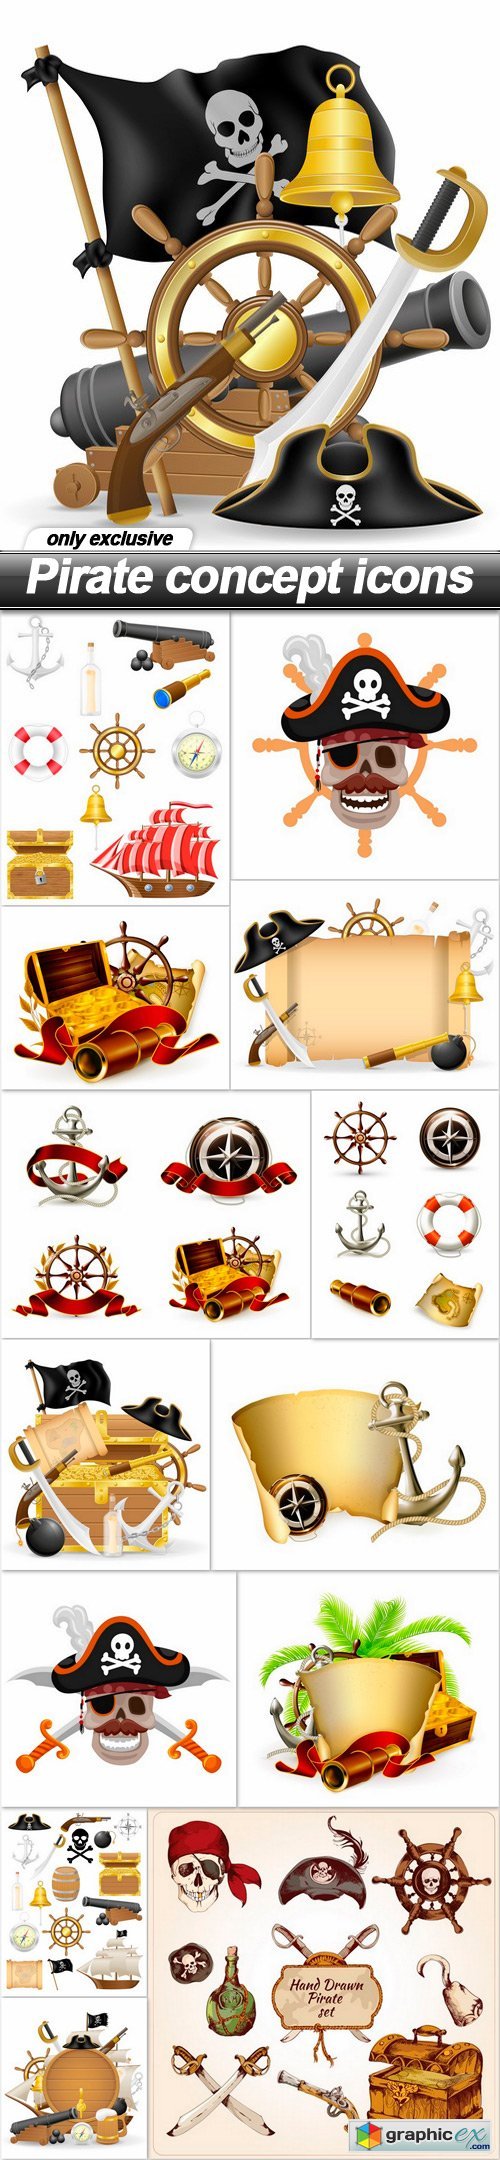 Pirate concept icons - 14 EPS